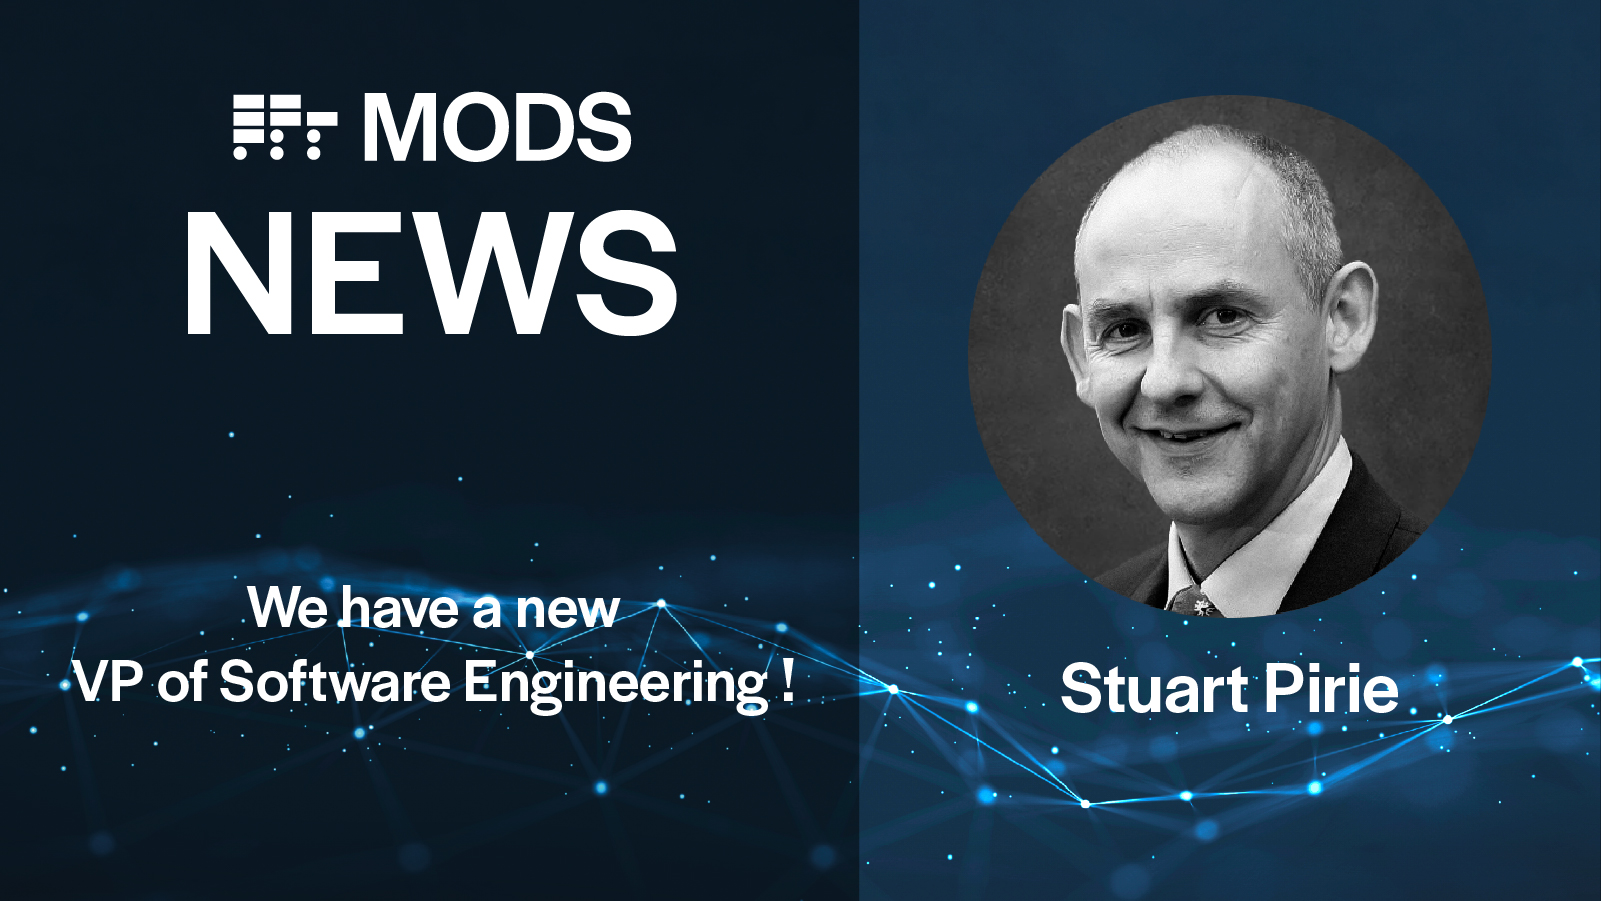 Stuart Pirie Appointed as VP of Software Engineering at MODS